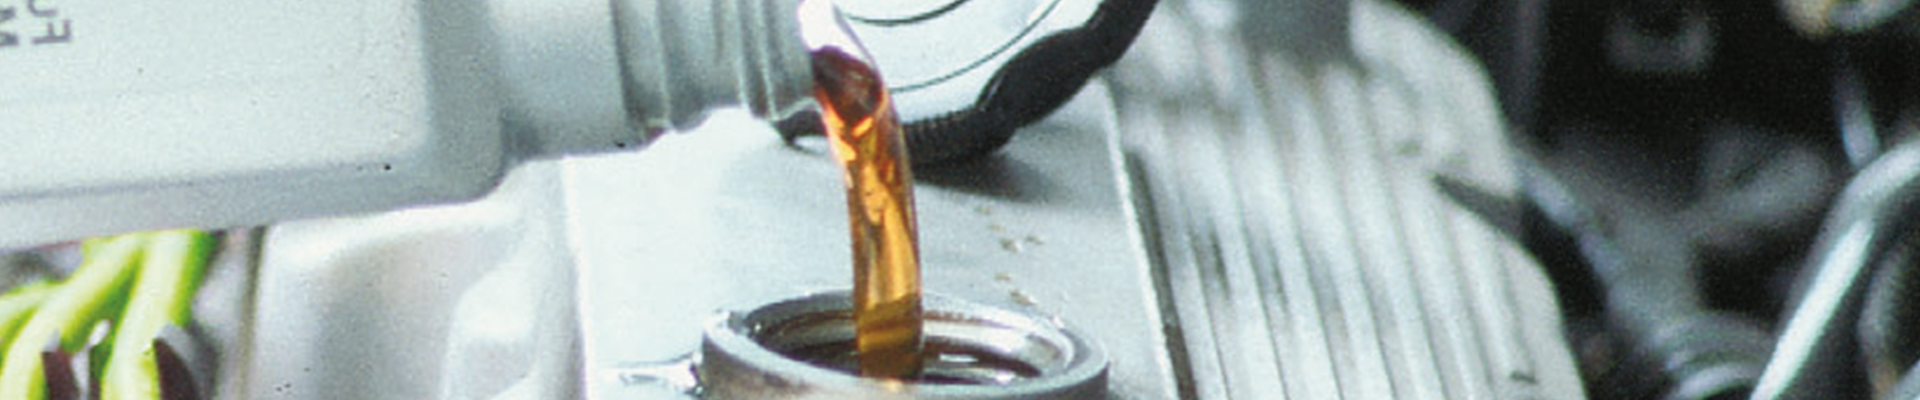 Engine oil being poured into a car engine